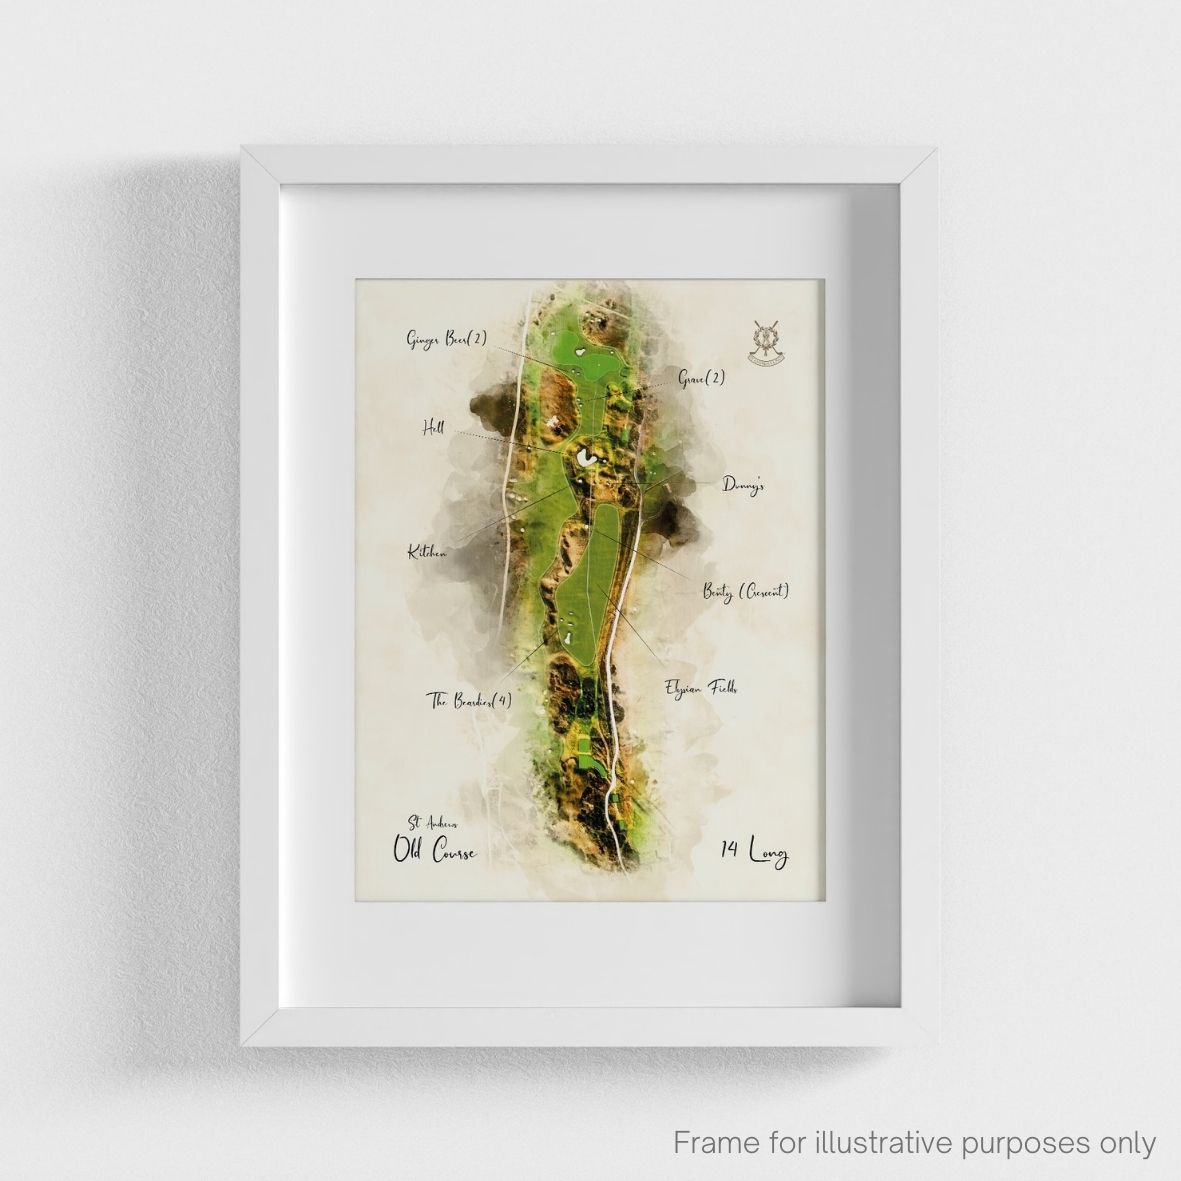 St Andrews Hole 14 WaterMap Print shown in a white frame